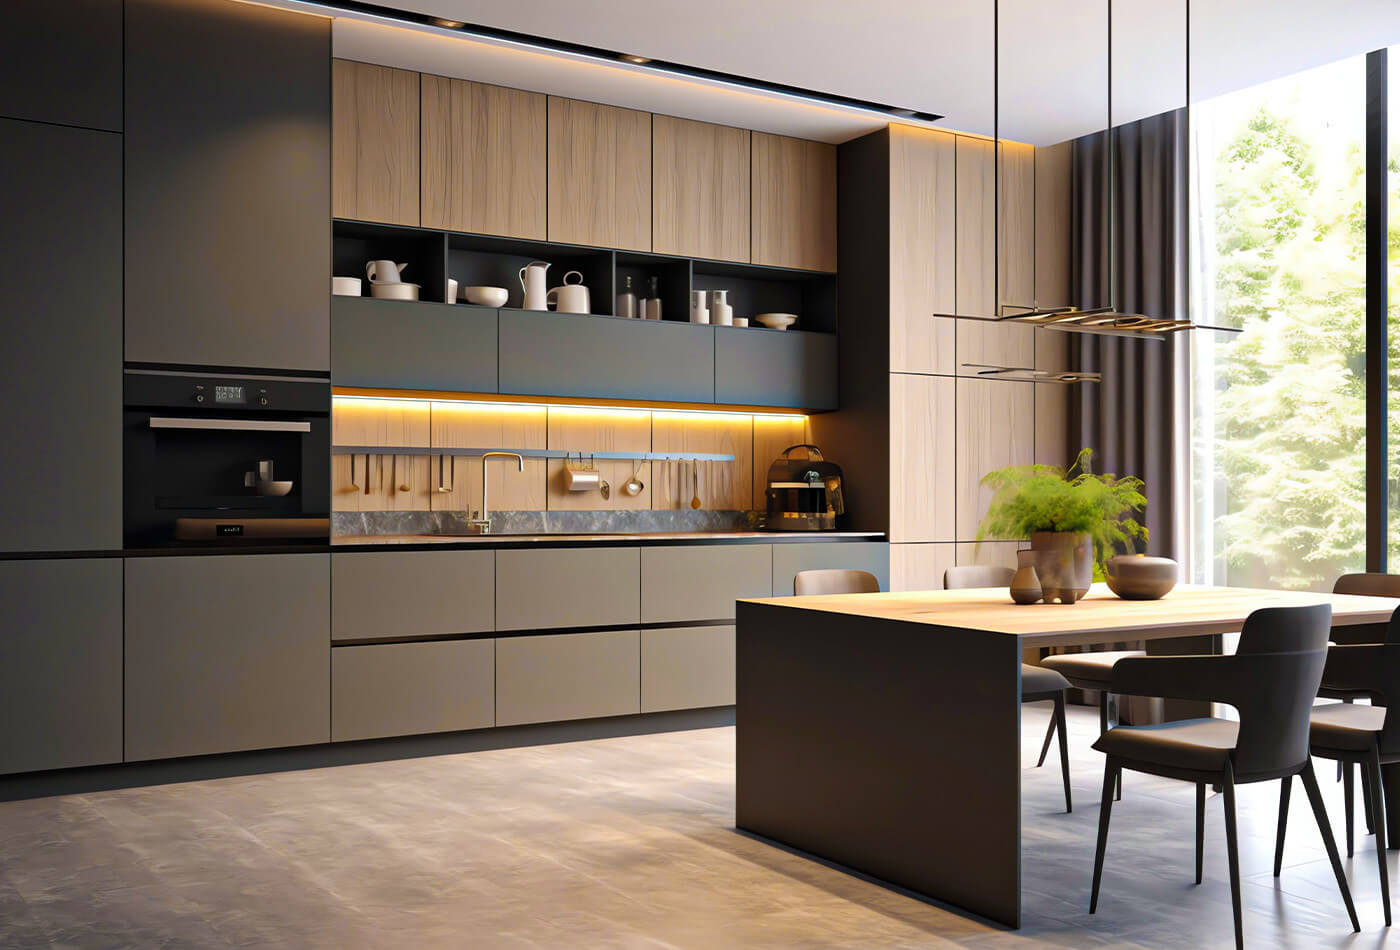 How To Style Modern Grey Kitchen Cabinets Cost Efficiently?